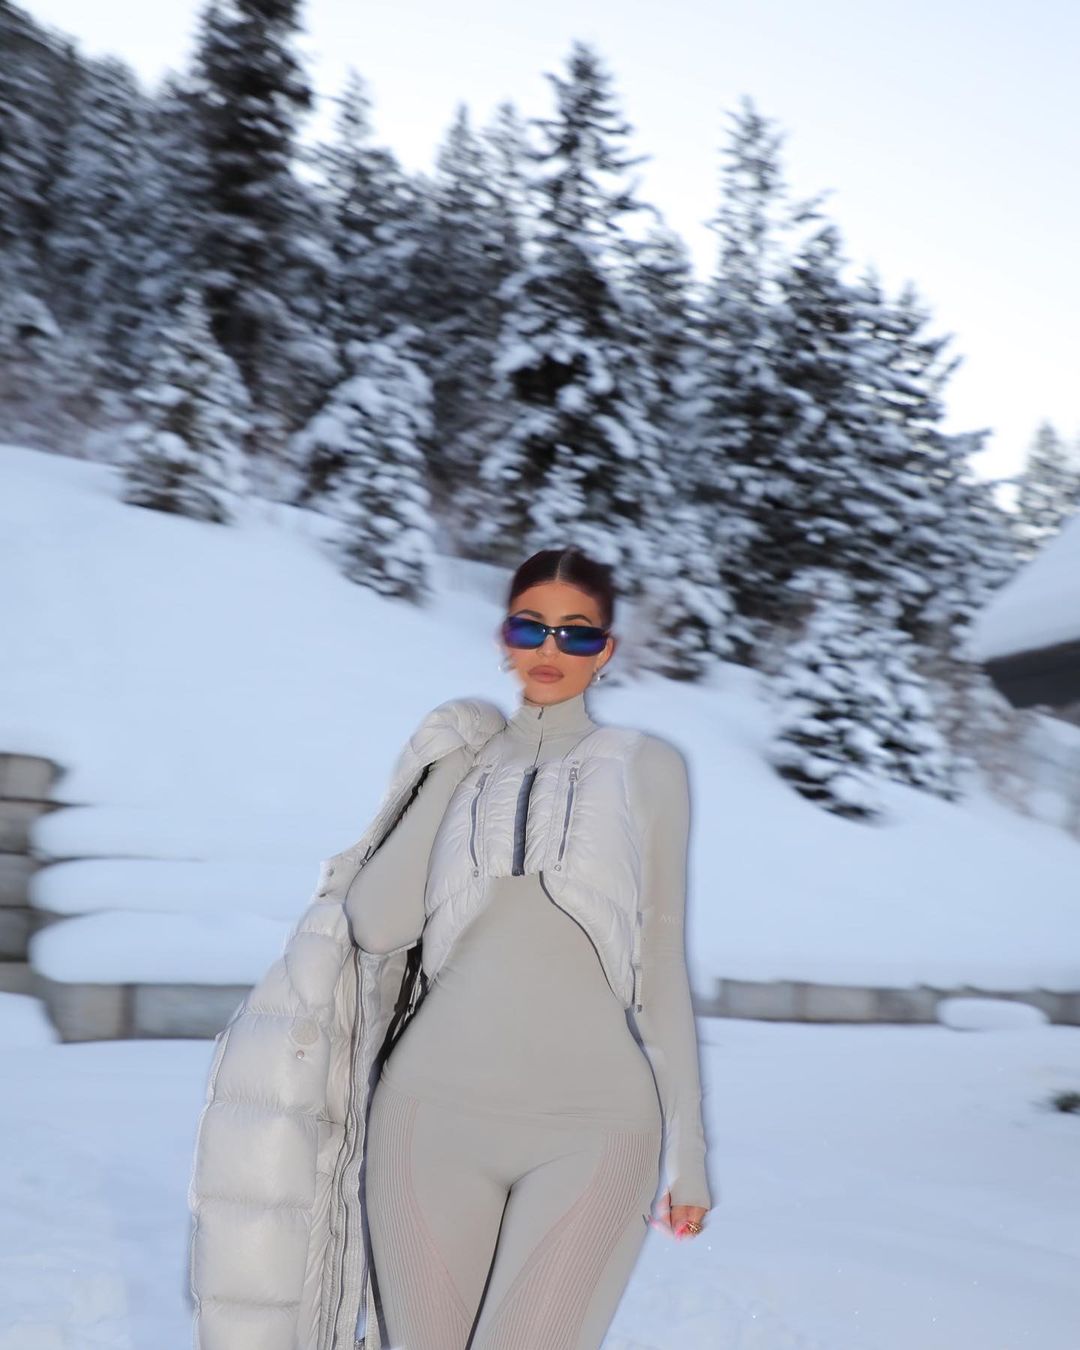 Kylie Jenner's Vintage Chanel Accessories in the Snow